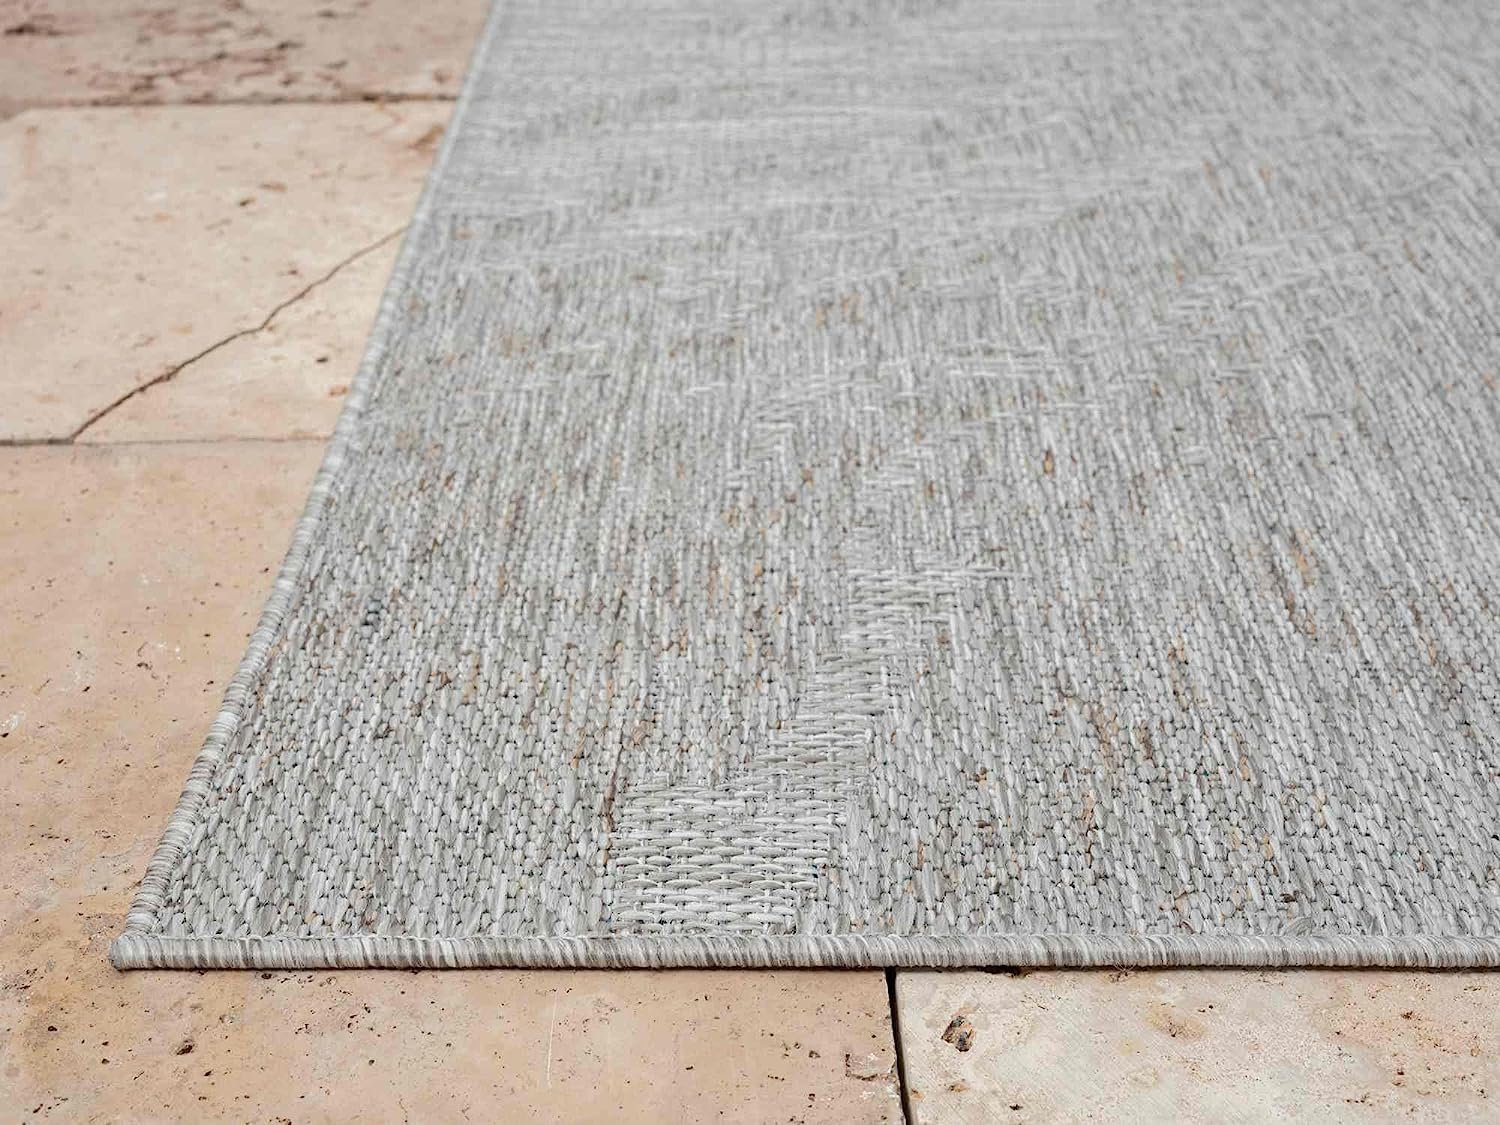 HR Waterproof Abstract Outdoor Rug - Stain and Fade-Resistant #1671